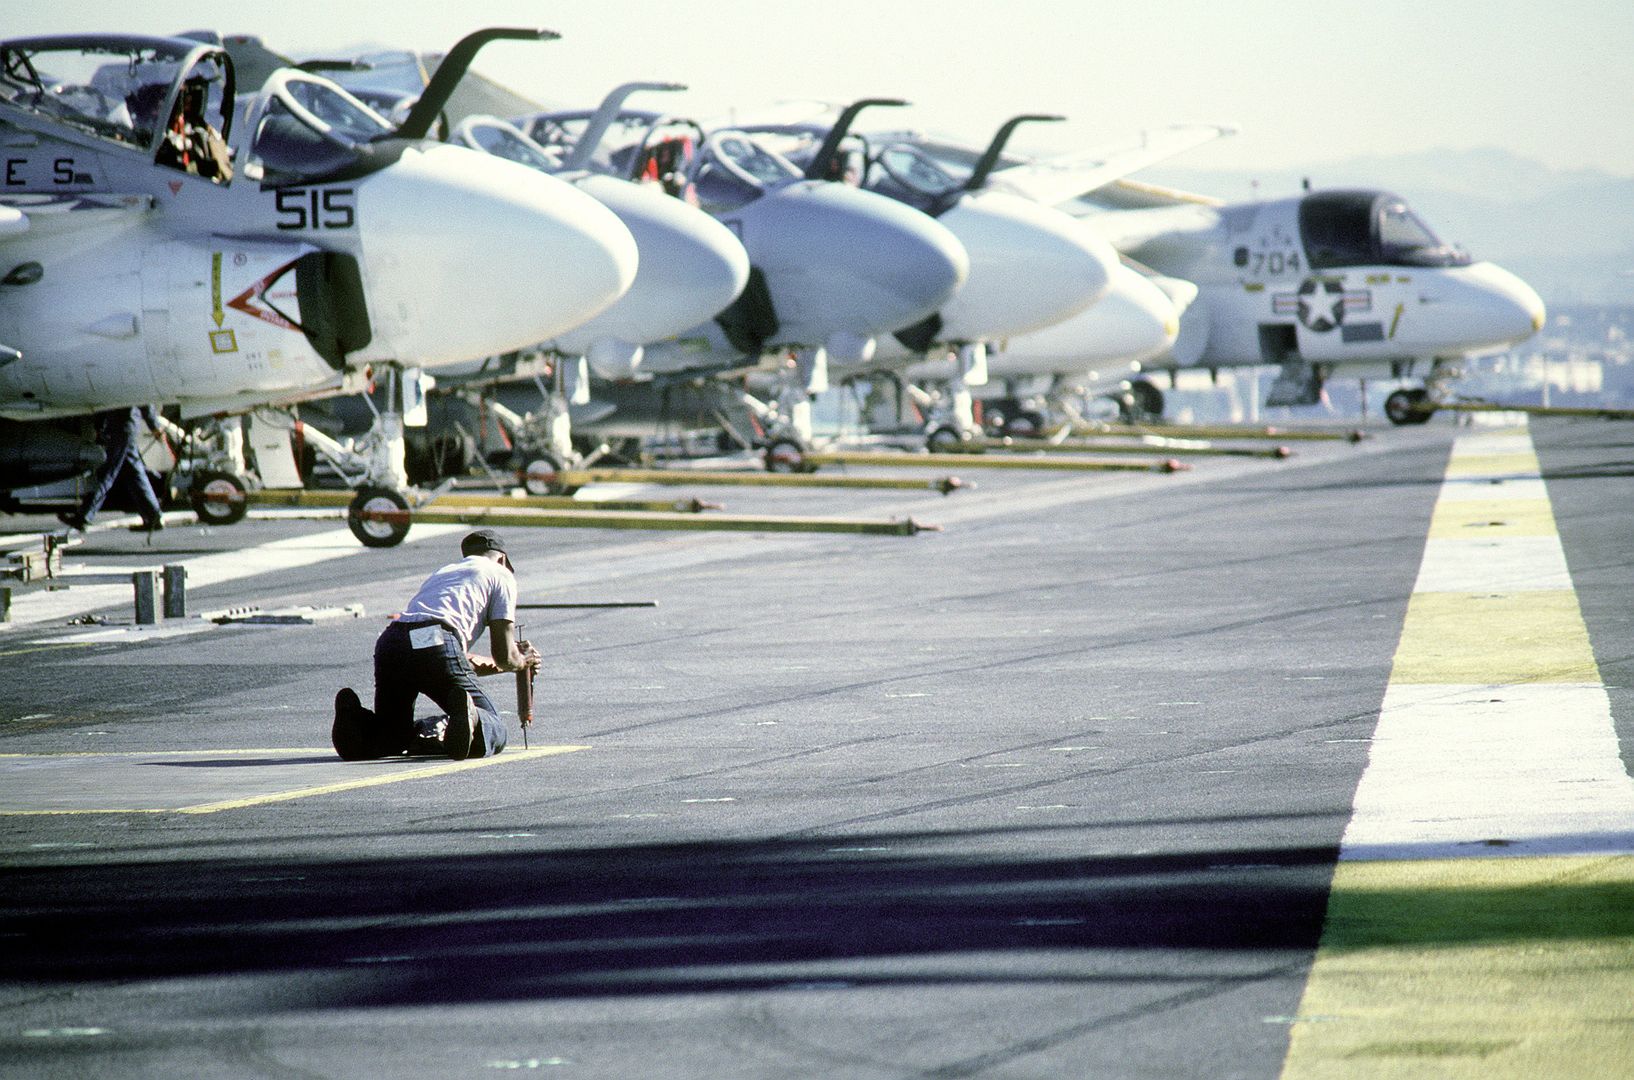 A Crew Member Performs Routine Maintenance On The Flight Deck Of The Aircraft Carrier USS KITTY HAWK